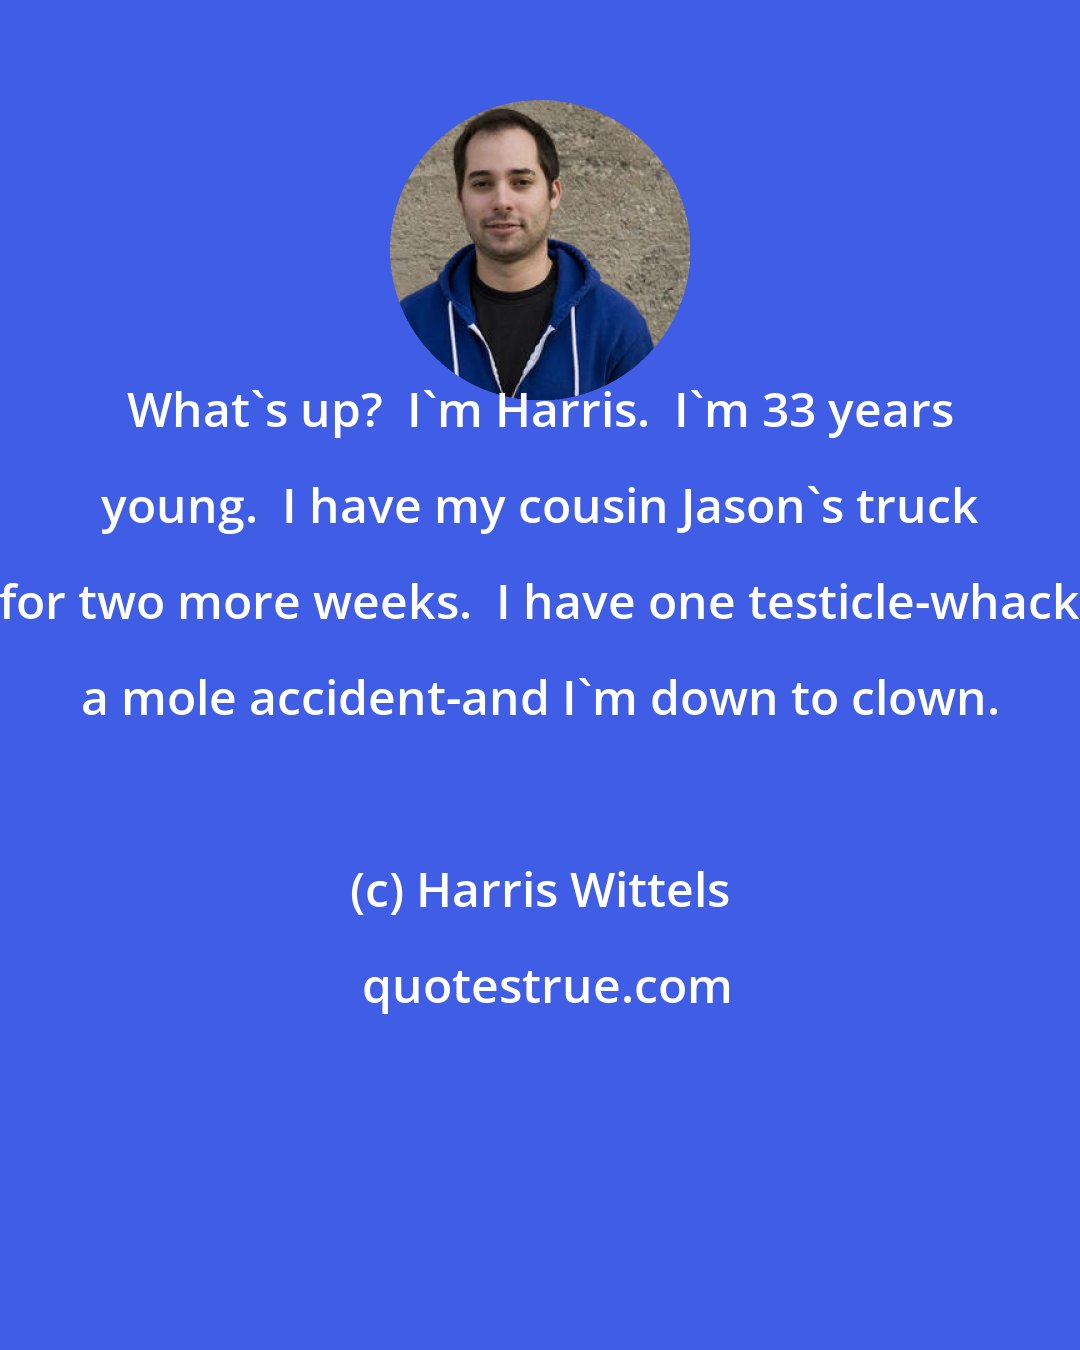 Harris Wittels: What's up?  I'm Harris.  I'm 33 years young.  I have my cousin Jason's truck for two more weeks.  I have one testicle-whack a mole accident-and I'm down to clown.